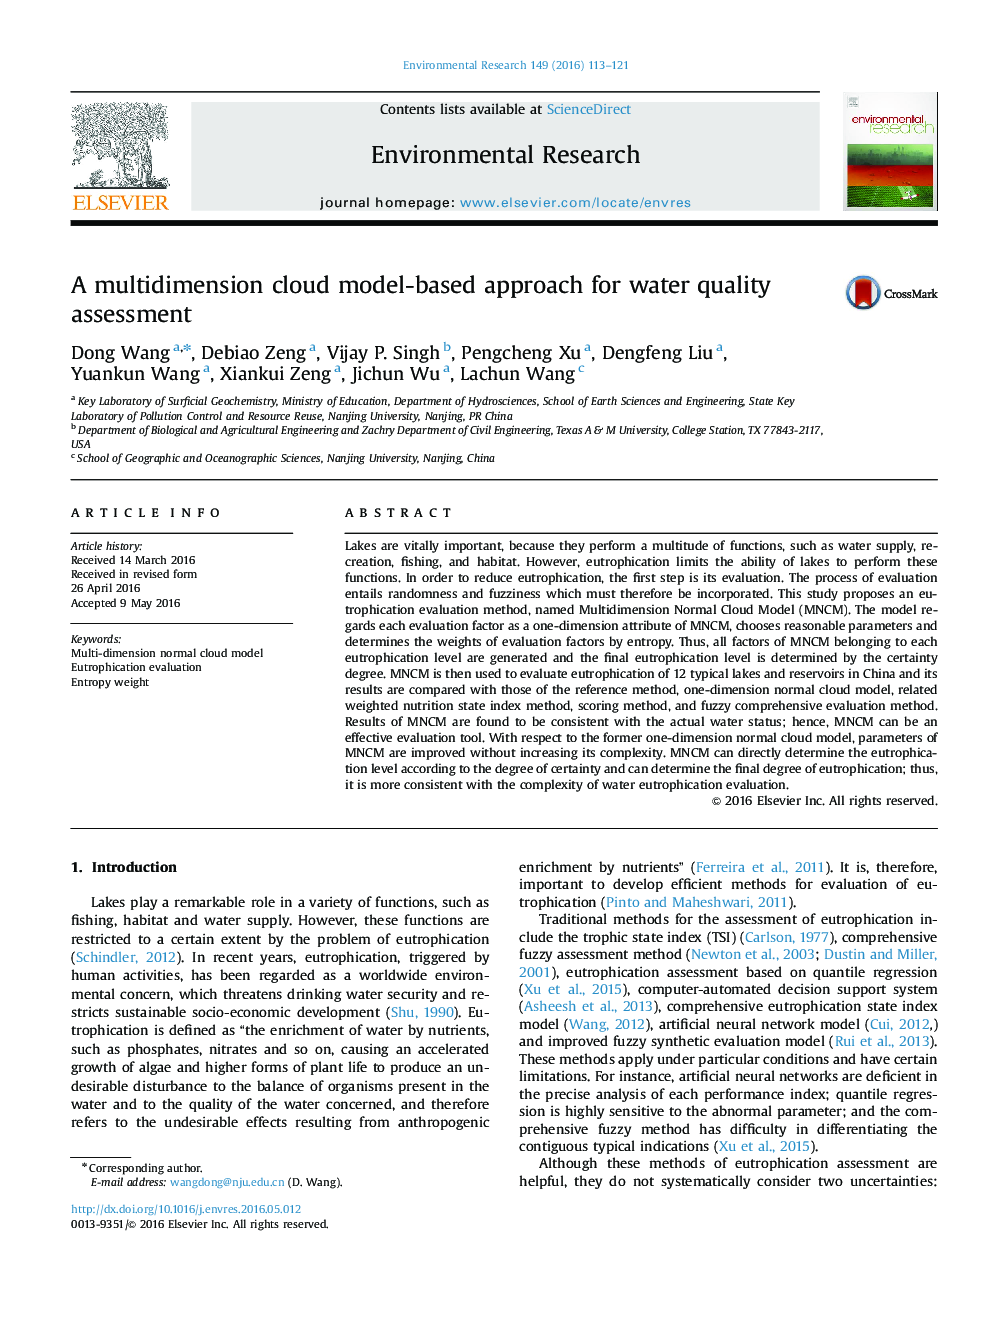 A multidimension cloud model-based approach for water quality assessment